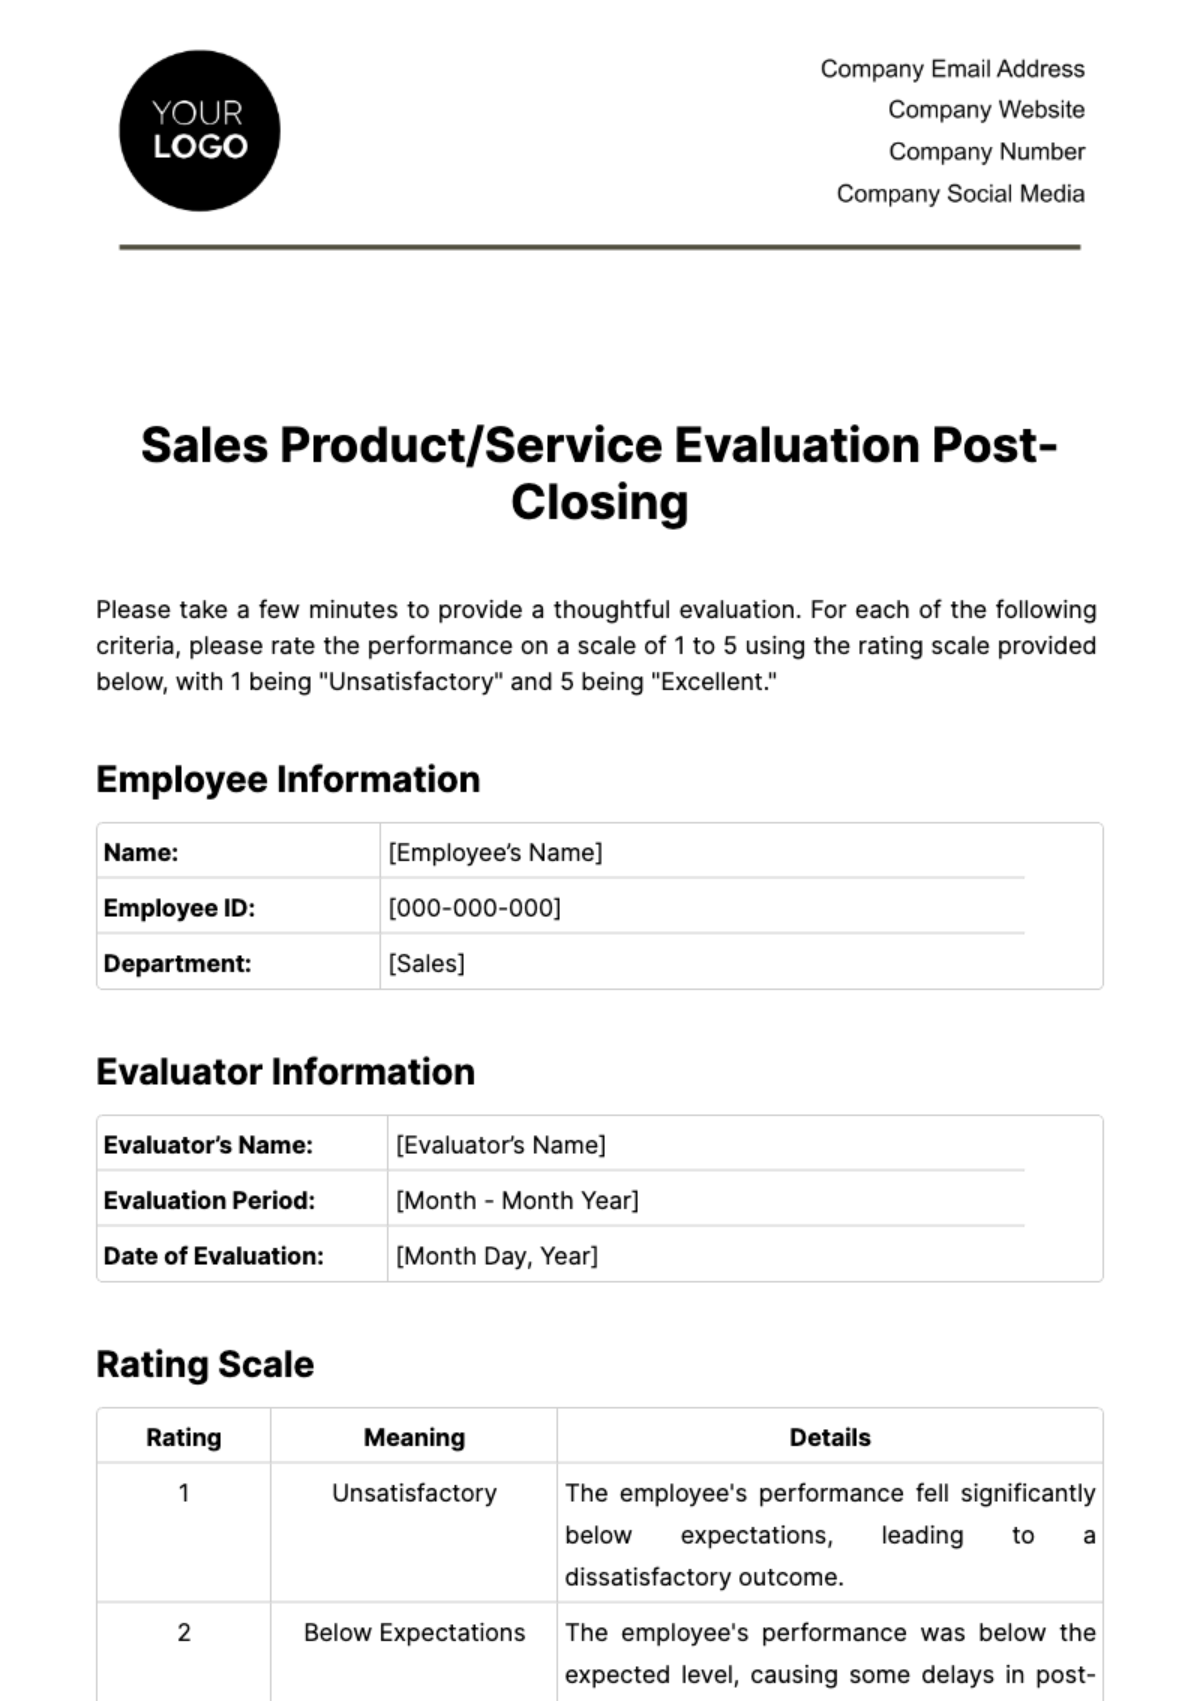 Sales Product/Service Evaluation Post-Closing Template